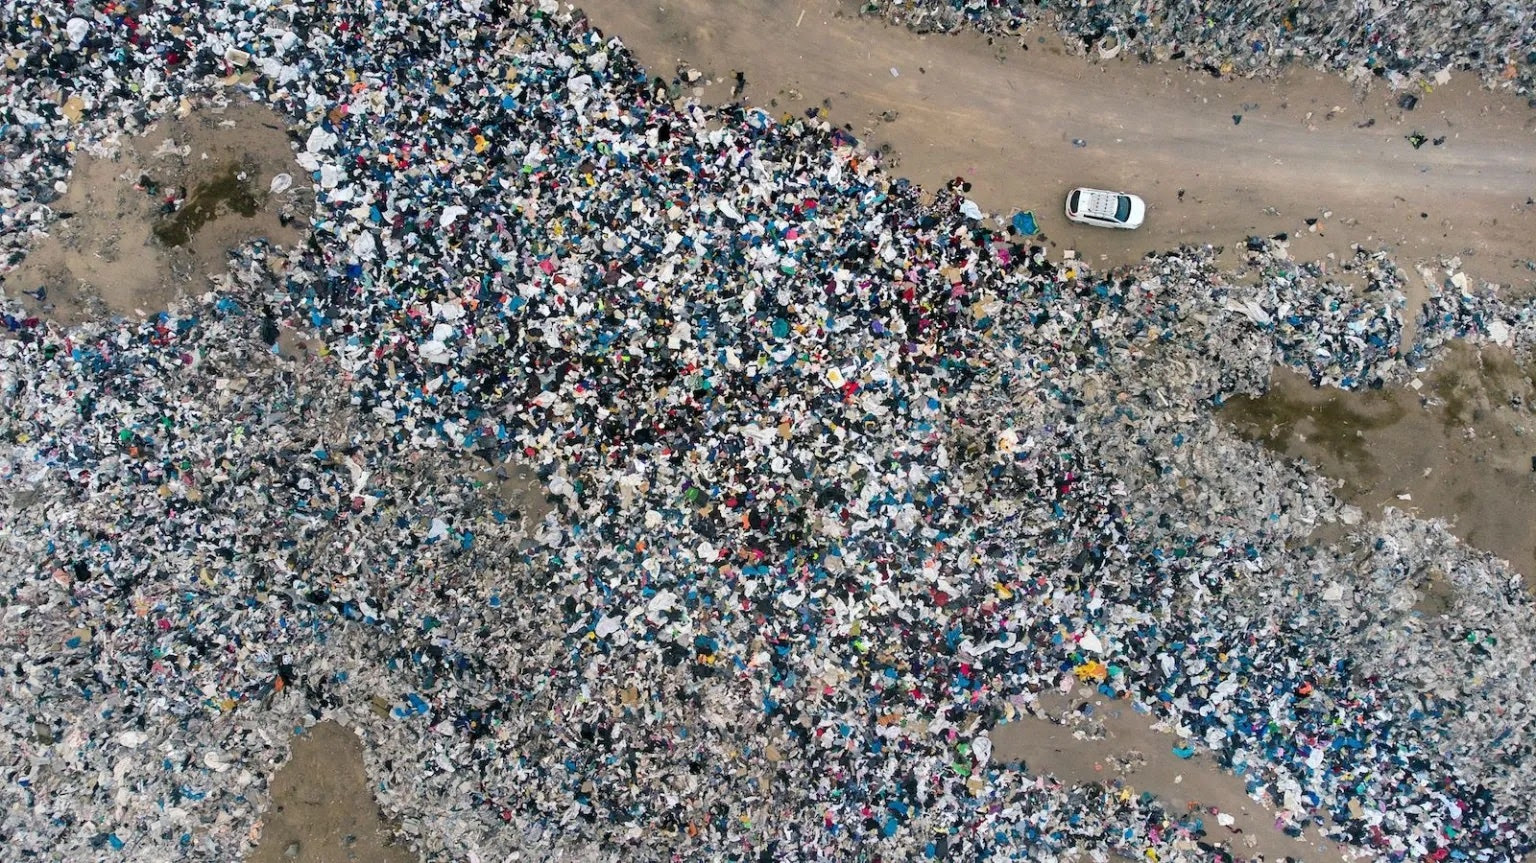 An aerial view of used clothes in the Atacama Desert